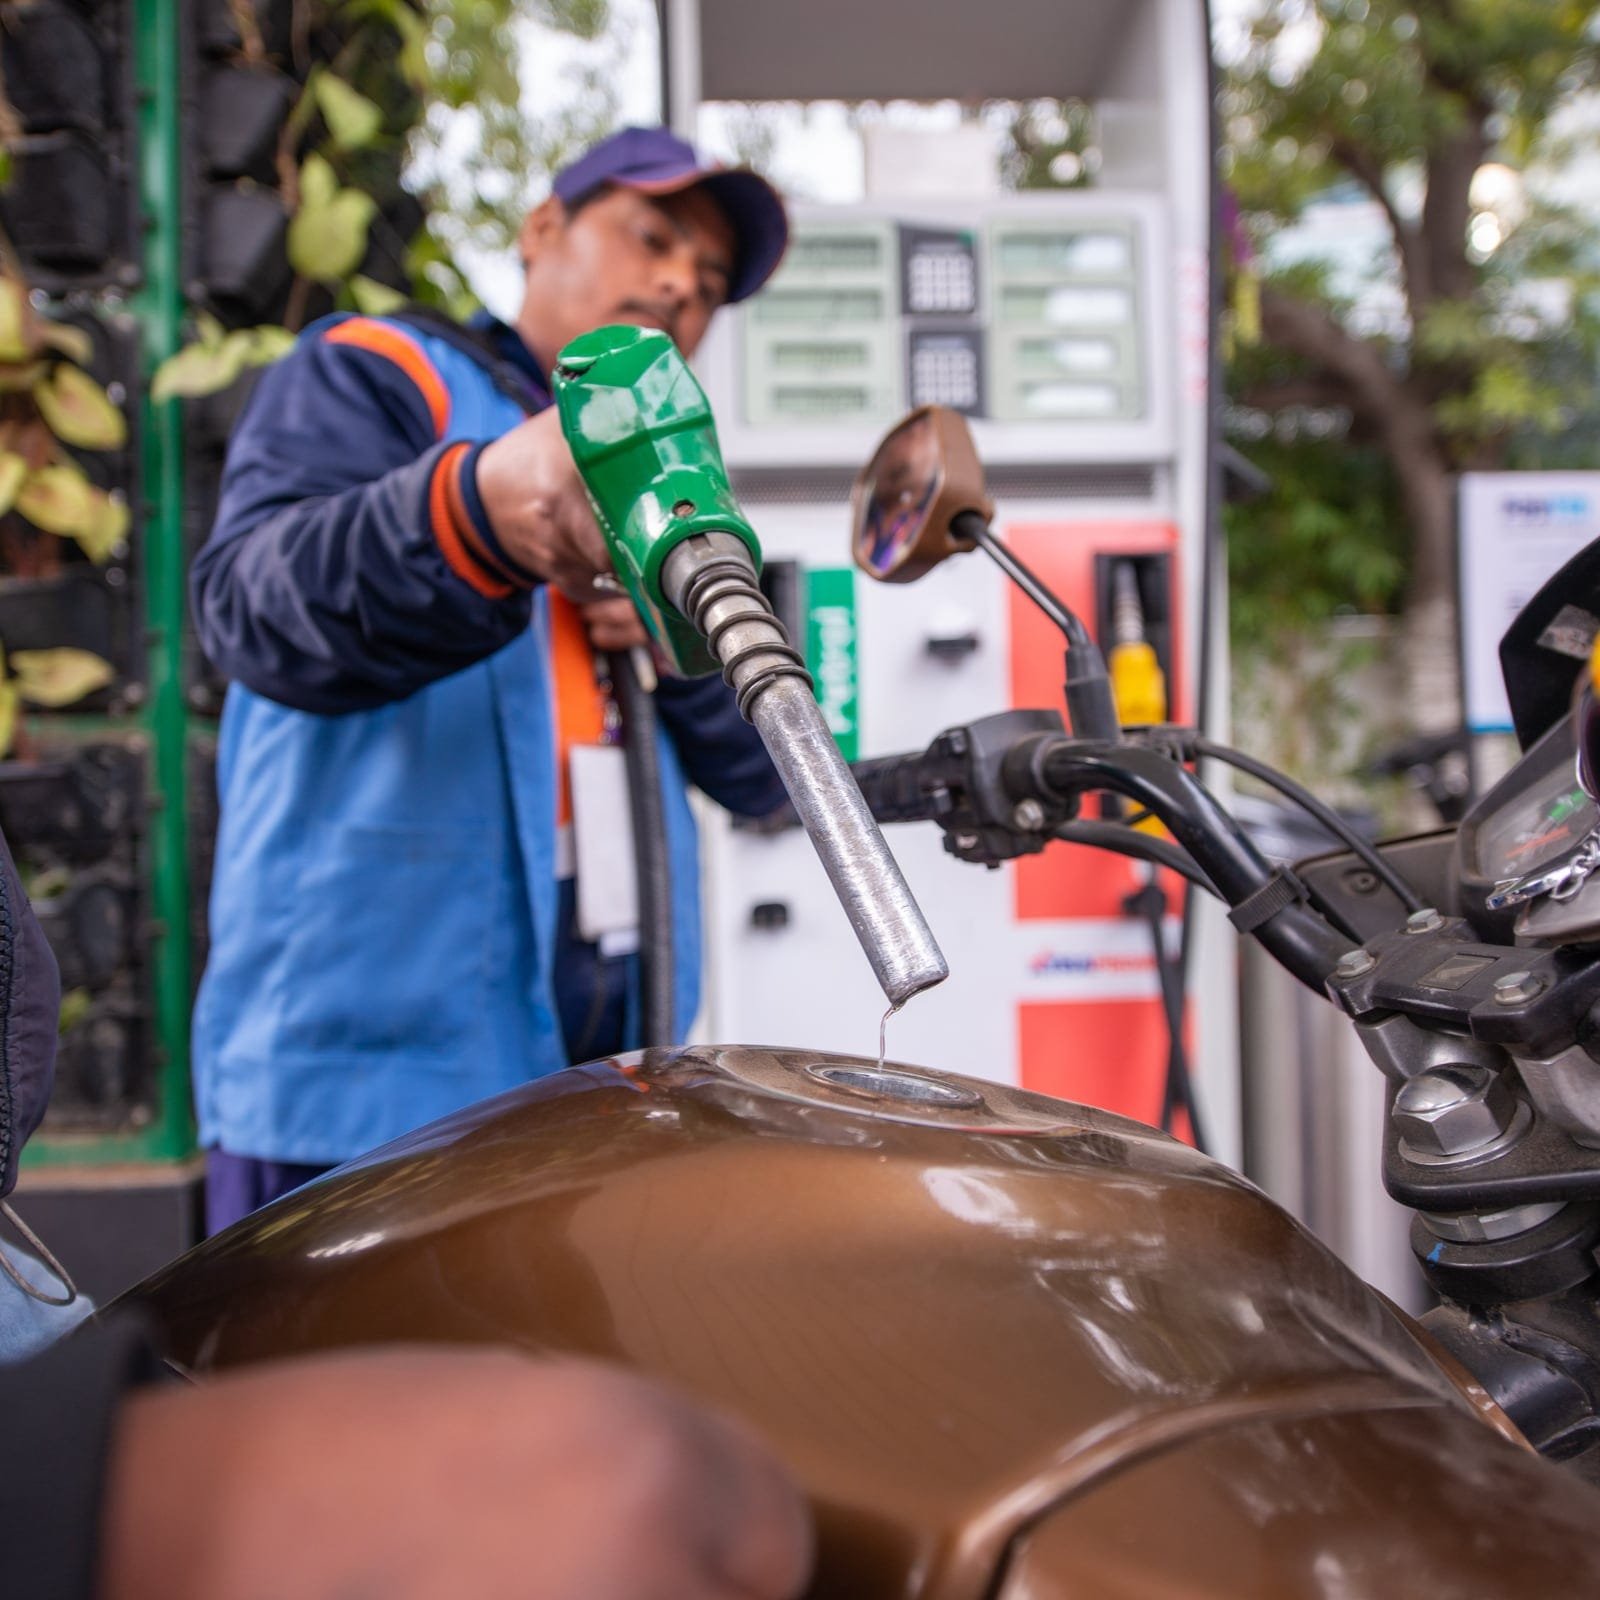 Three state cuts tax on petrol, diesel after Centre reduces excise duty on fuel